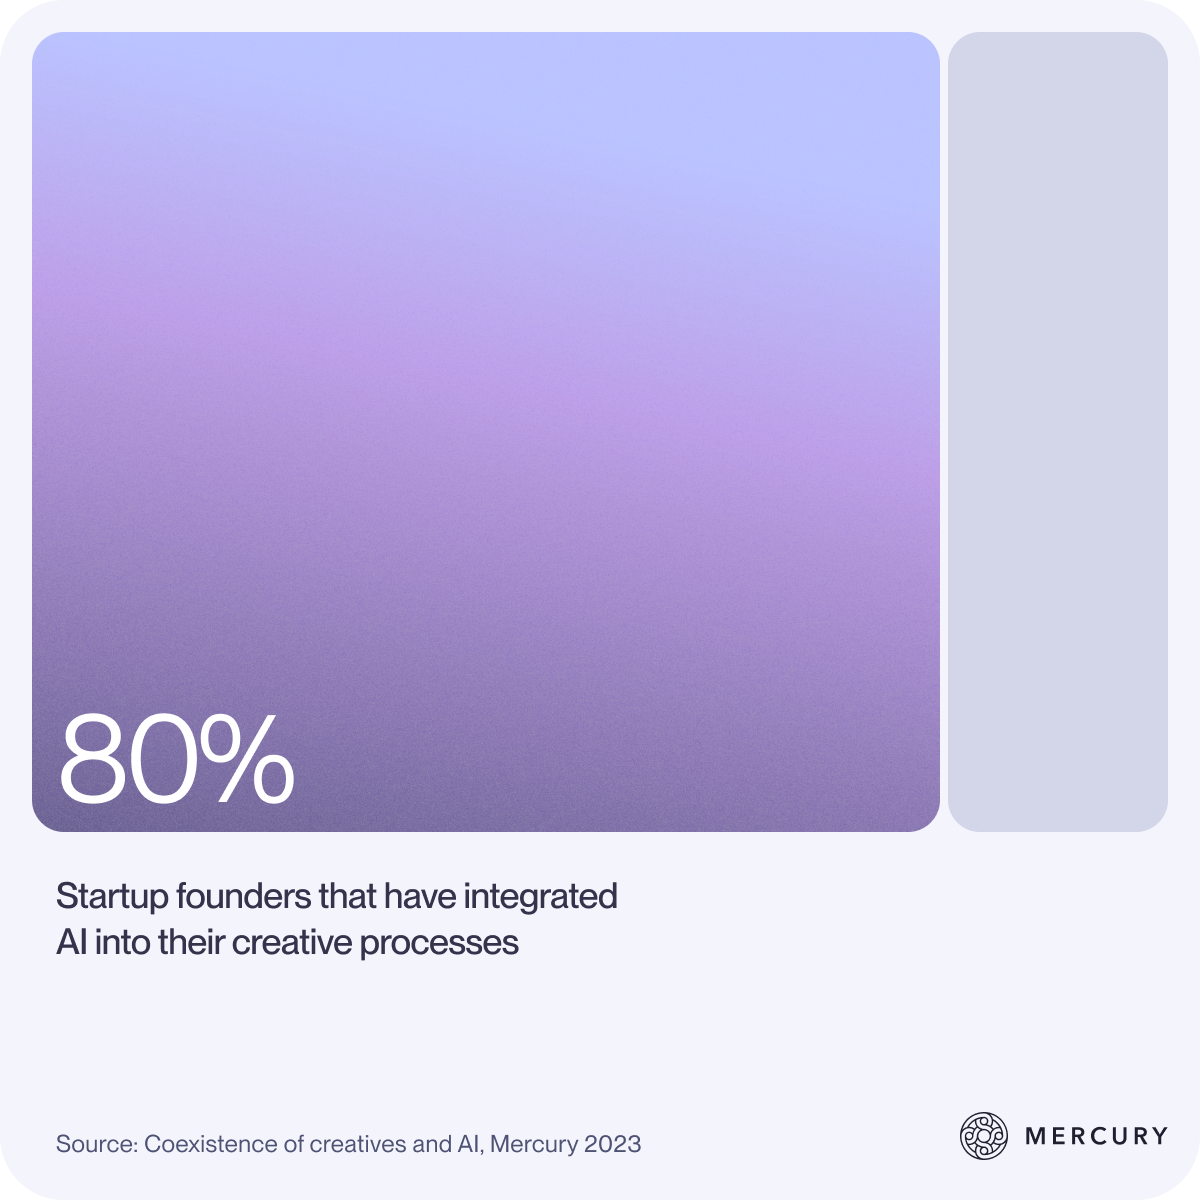 Bar chart showing 80% of startup founders have integrated AI into their creative processes